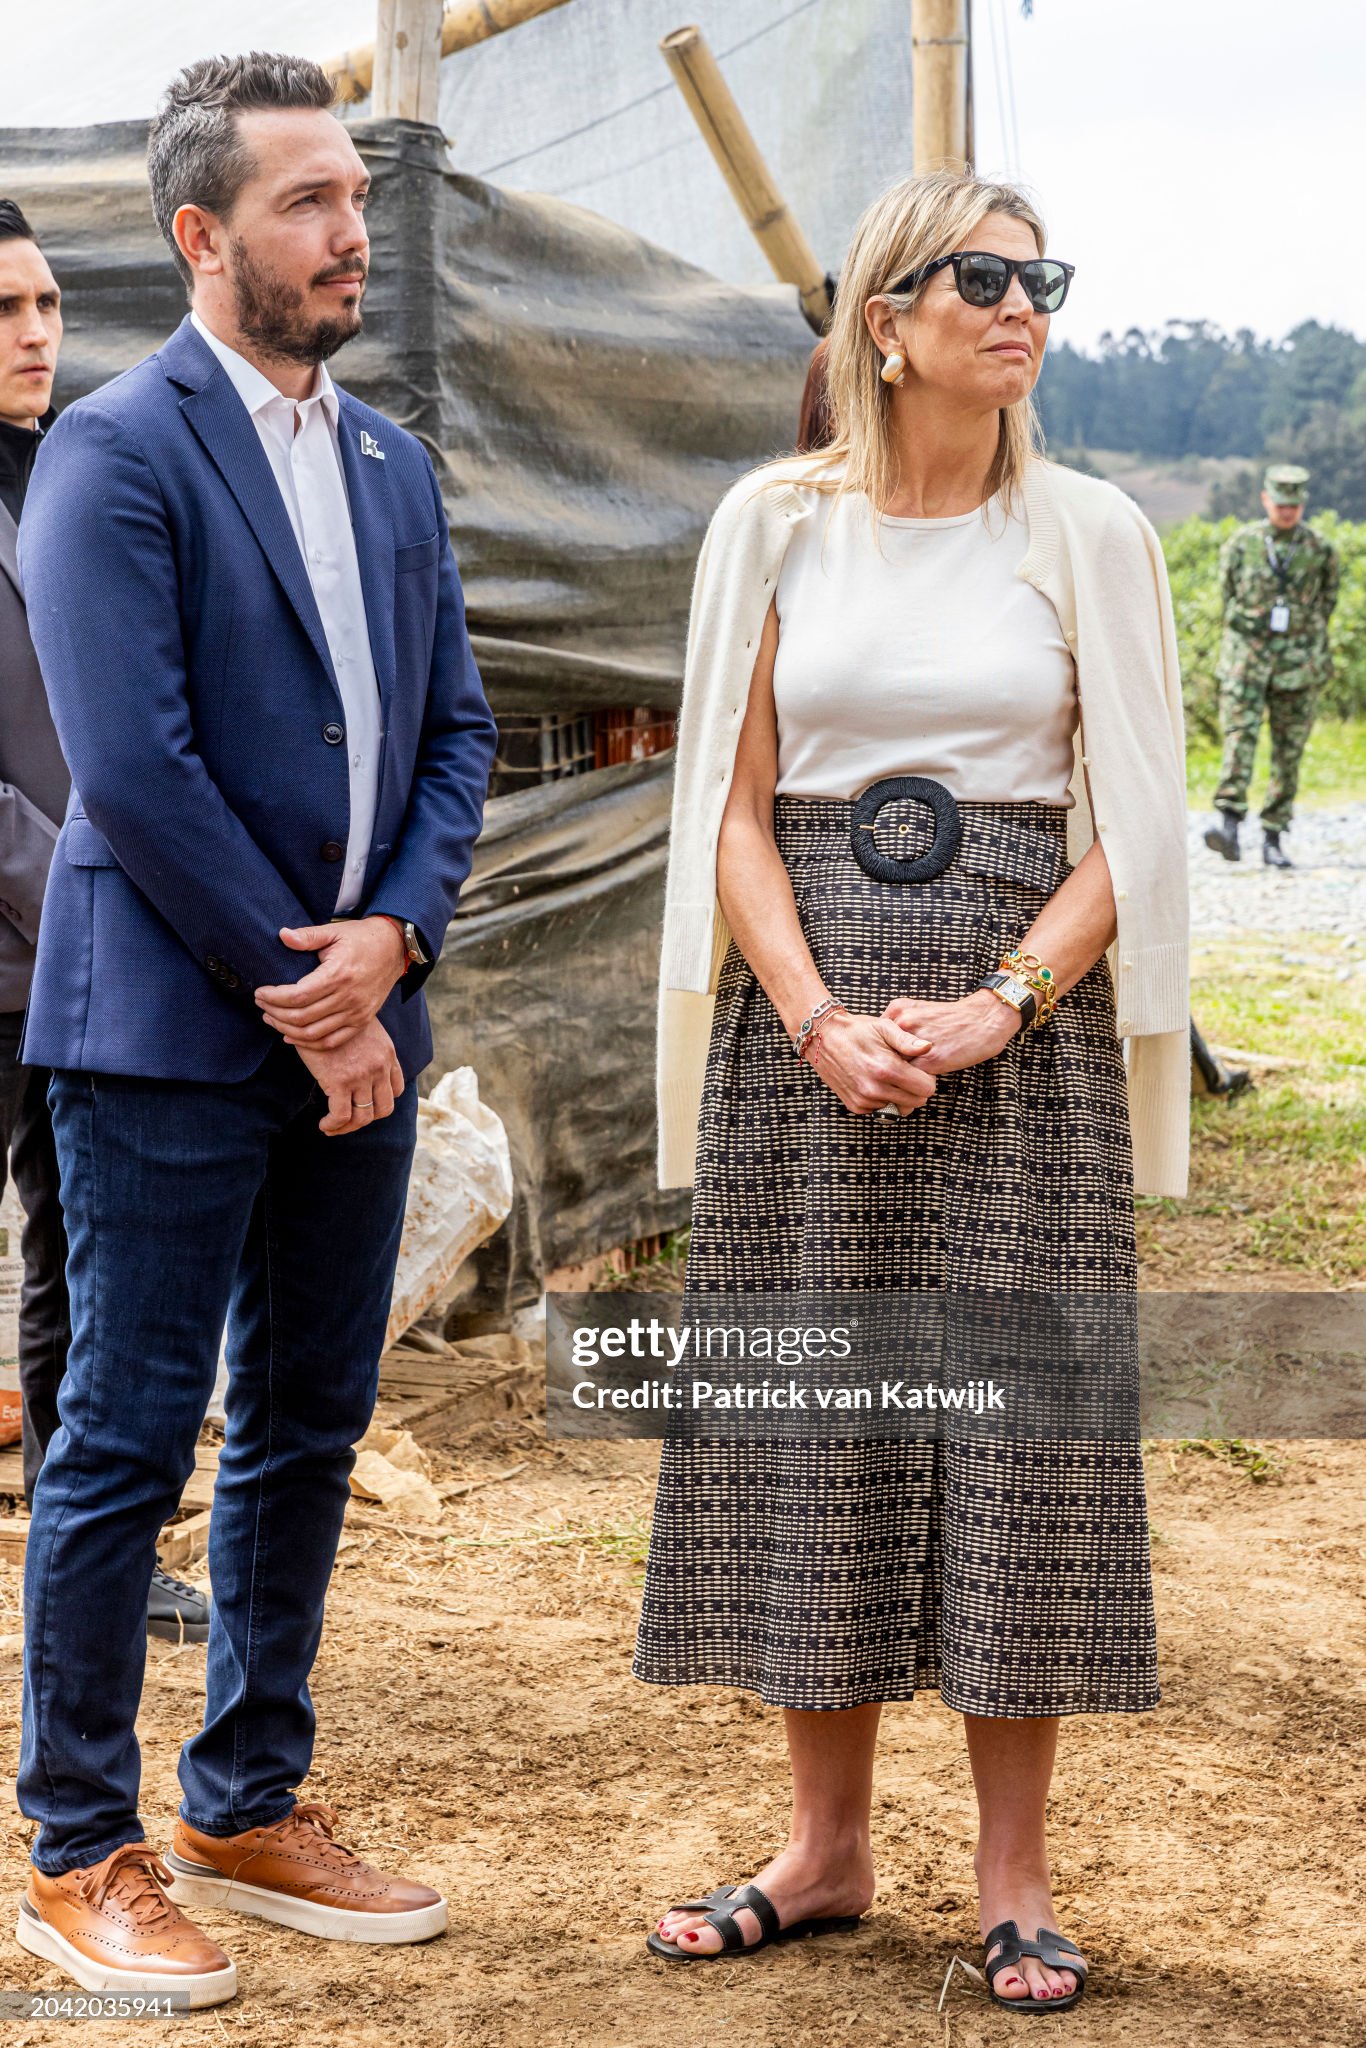 queen-maxima-of-the-netherlands-visits-colombia-day-one.jpg?s=2048x2048&w=gi&k=20&c=liu0aSgDE0Vy69lo-z77uDIW5JqSi1s-_orXGz1psI0=